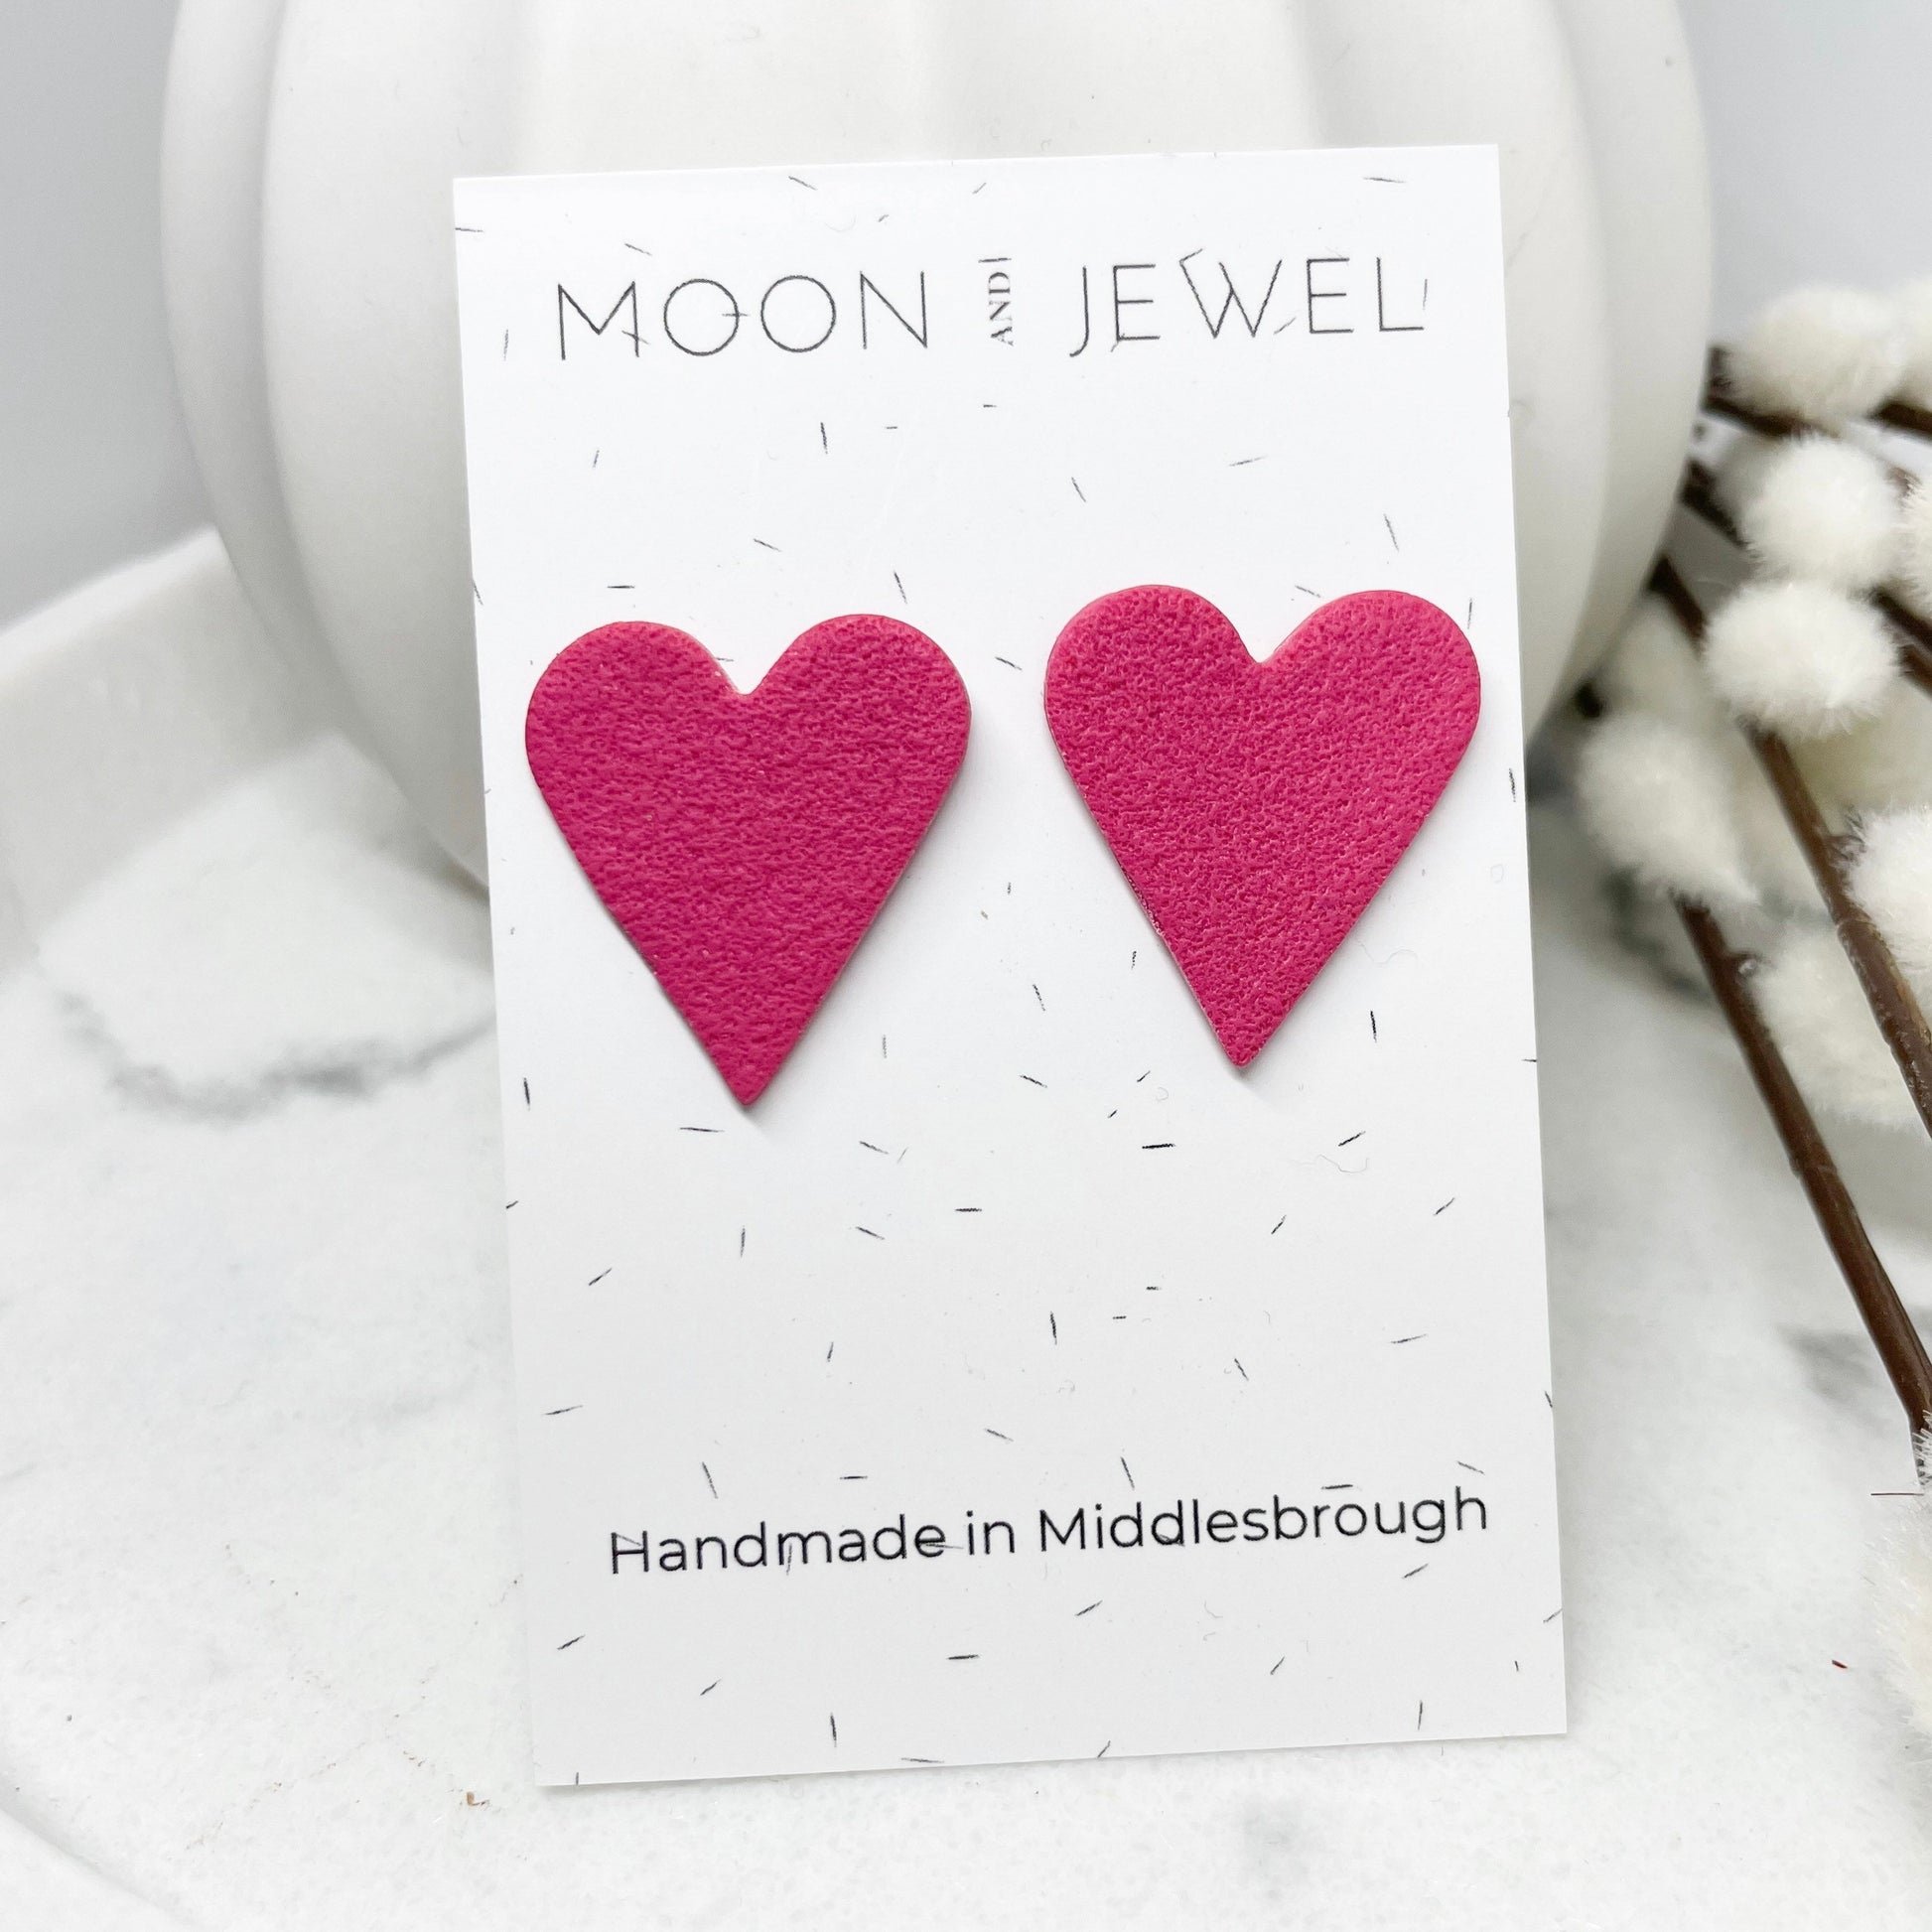 Heart earrings, polymer clay stud earrings, beautiful birthday gift, sister gift, girlfriend gift, valentines gift for her, galentine’s gift